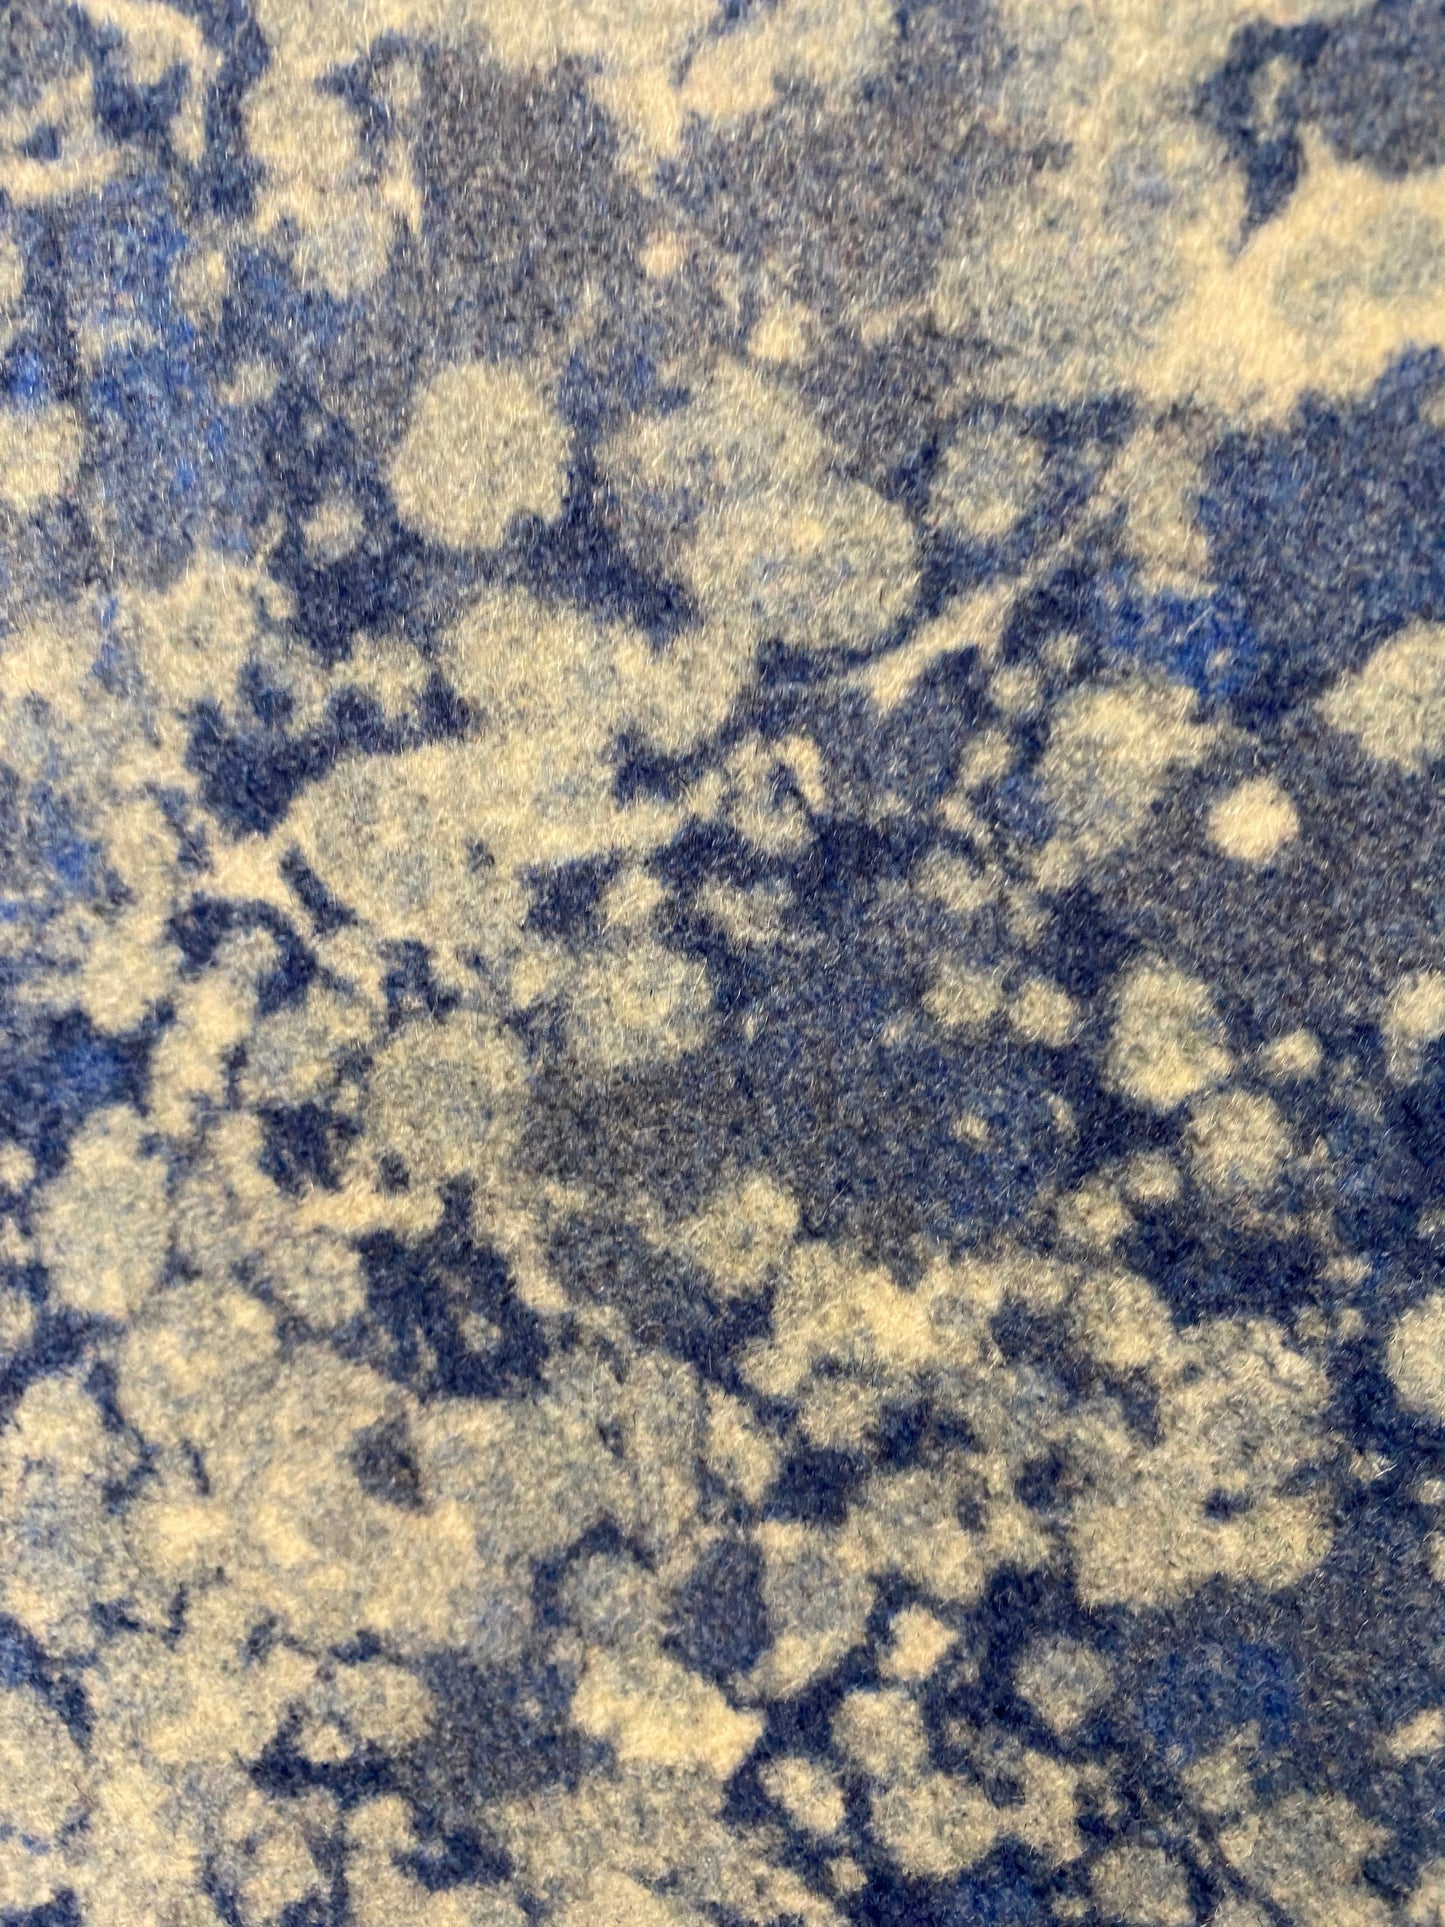 In Stock: Printed Marbled Wool Fabric - 'Ditzy' Col: Blue Daze - 100% Wool (1m x 1m)